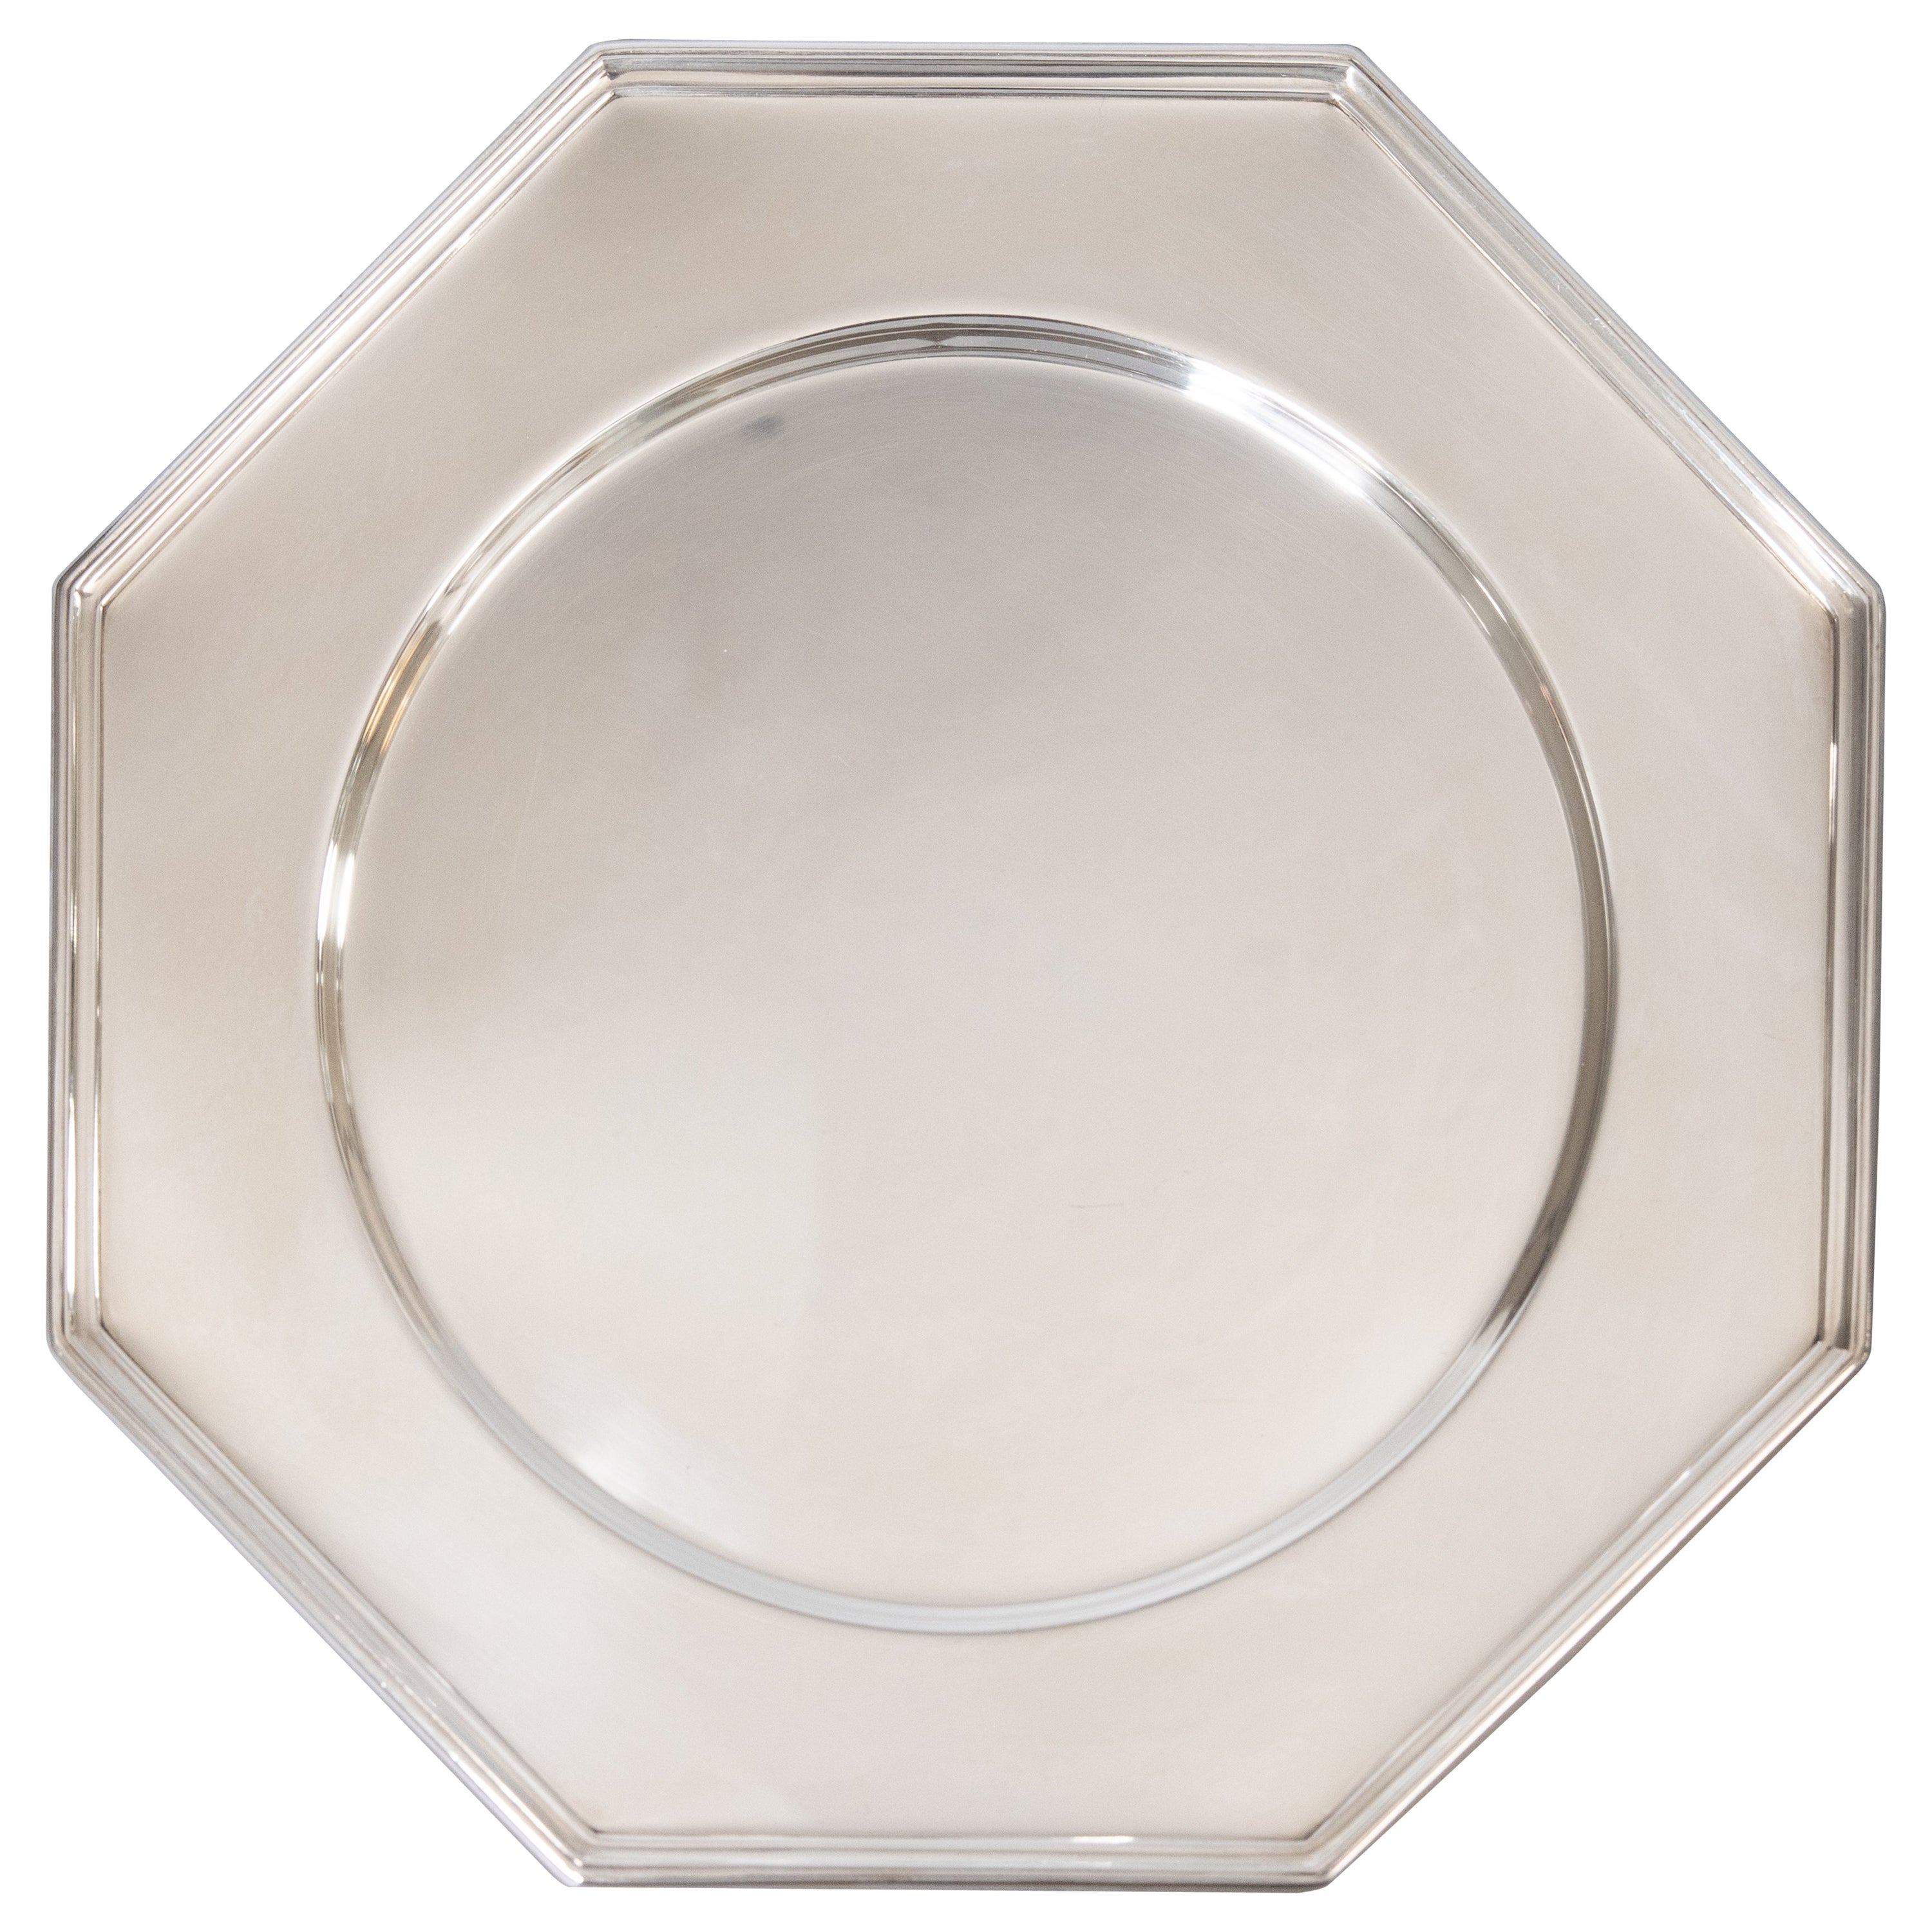 Mid-20th Century, English Silver Plate Octagonal Barware Drinks Tray For Sale